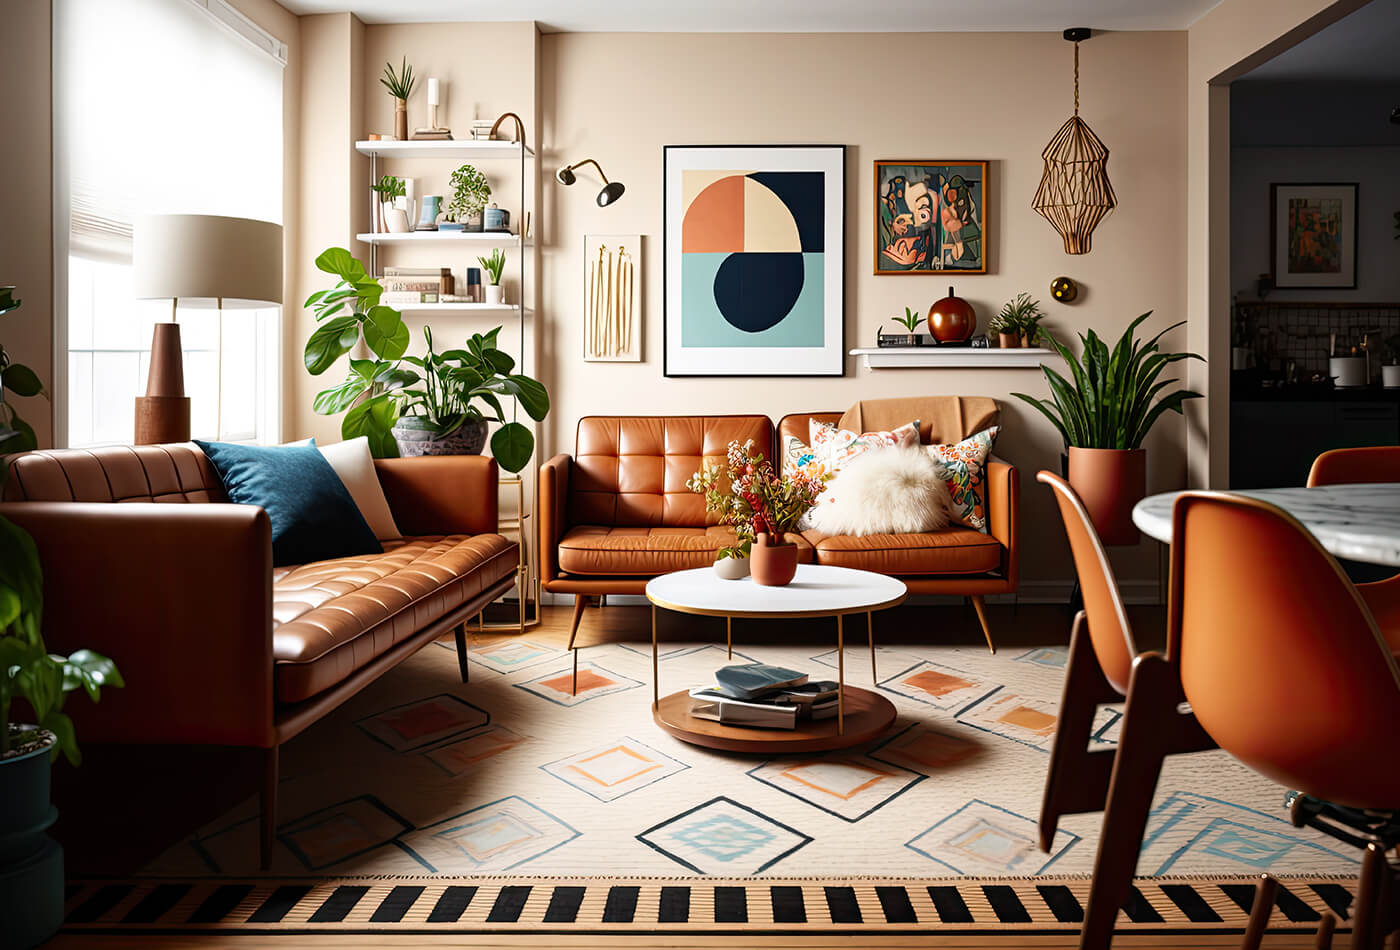 Maximalist Design Style: Loud Designs, Rich Shades, And Art